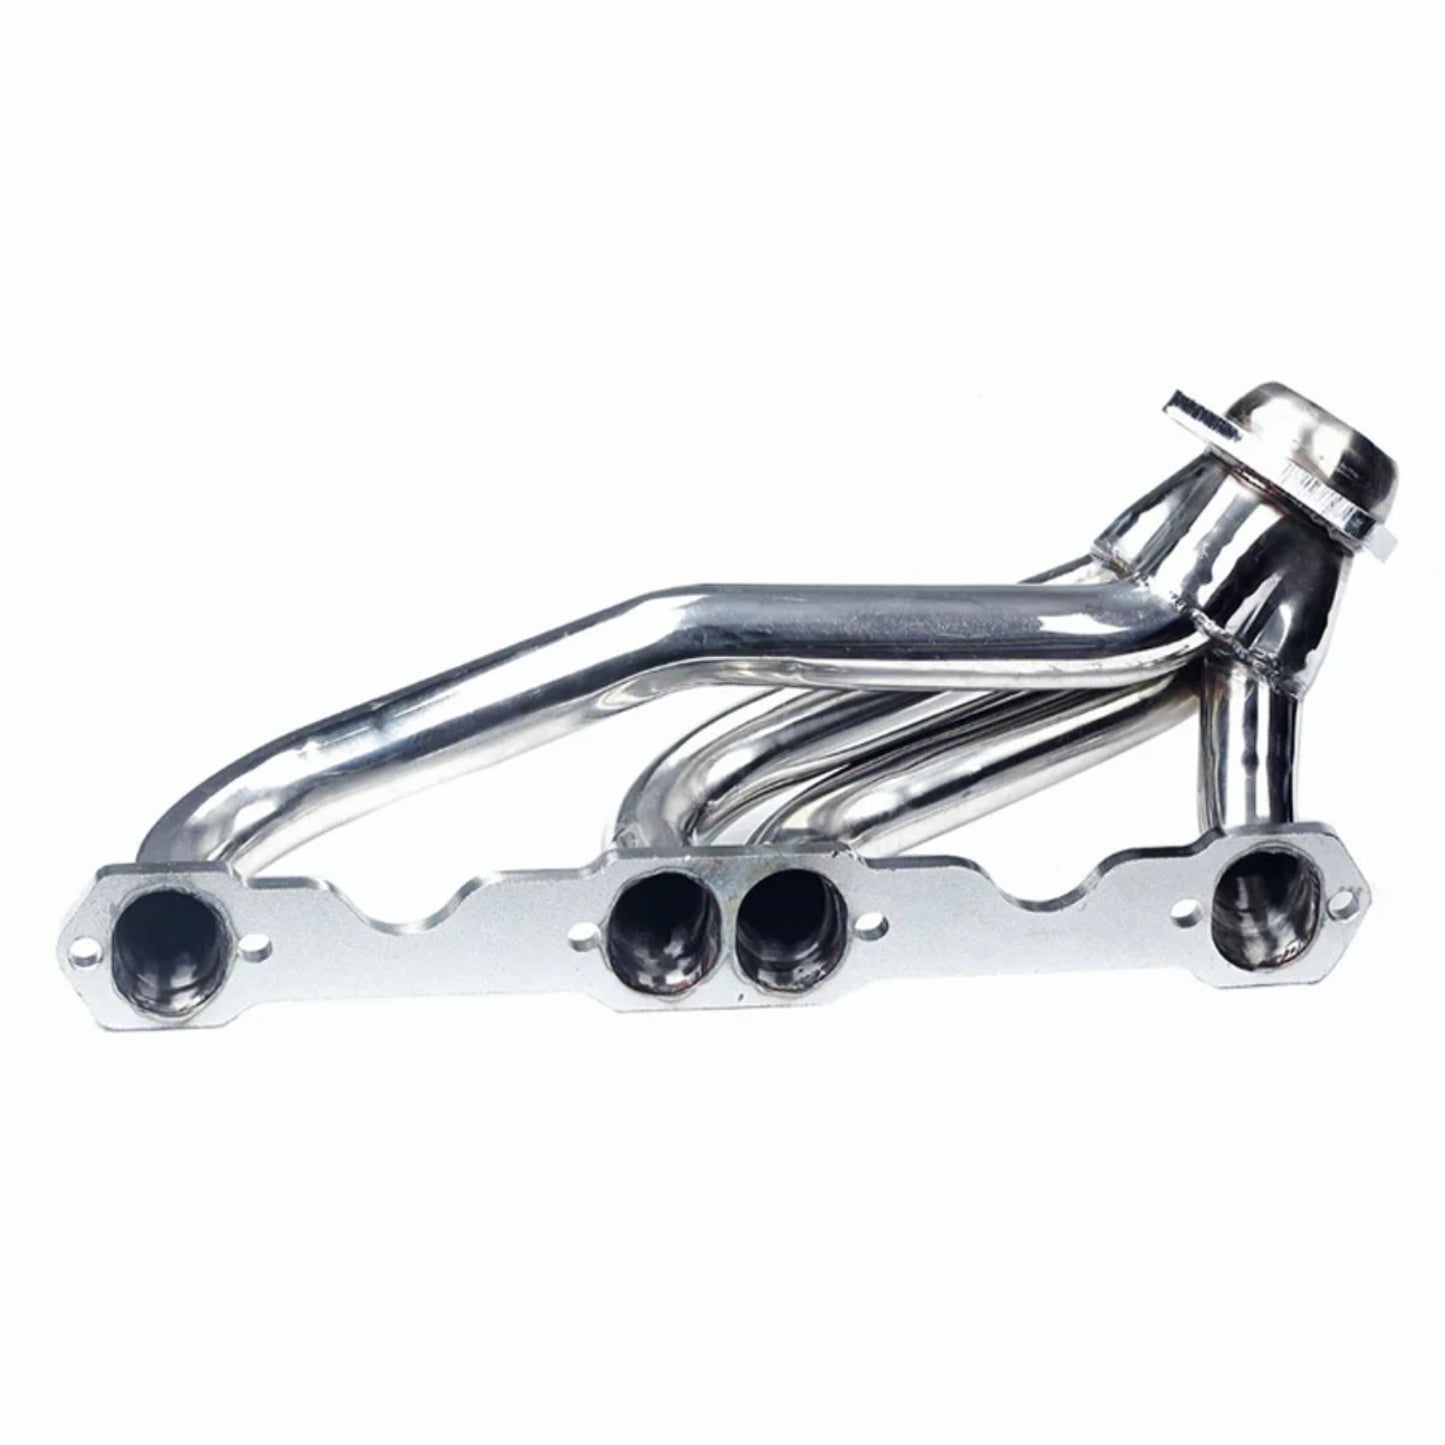 Stainless Exhaust Manifold Header for 1988-1997 Chevy GMC 5.0L 5.7L V8 C/K Pickup Truck